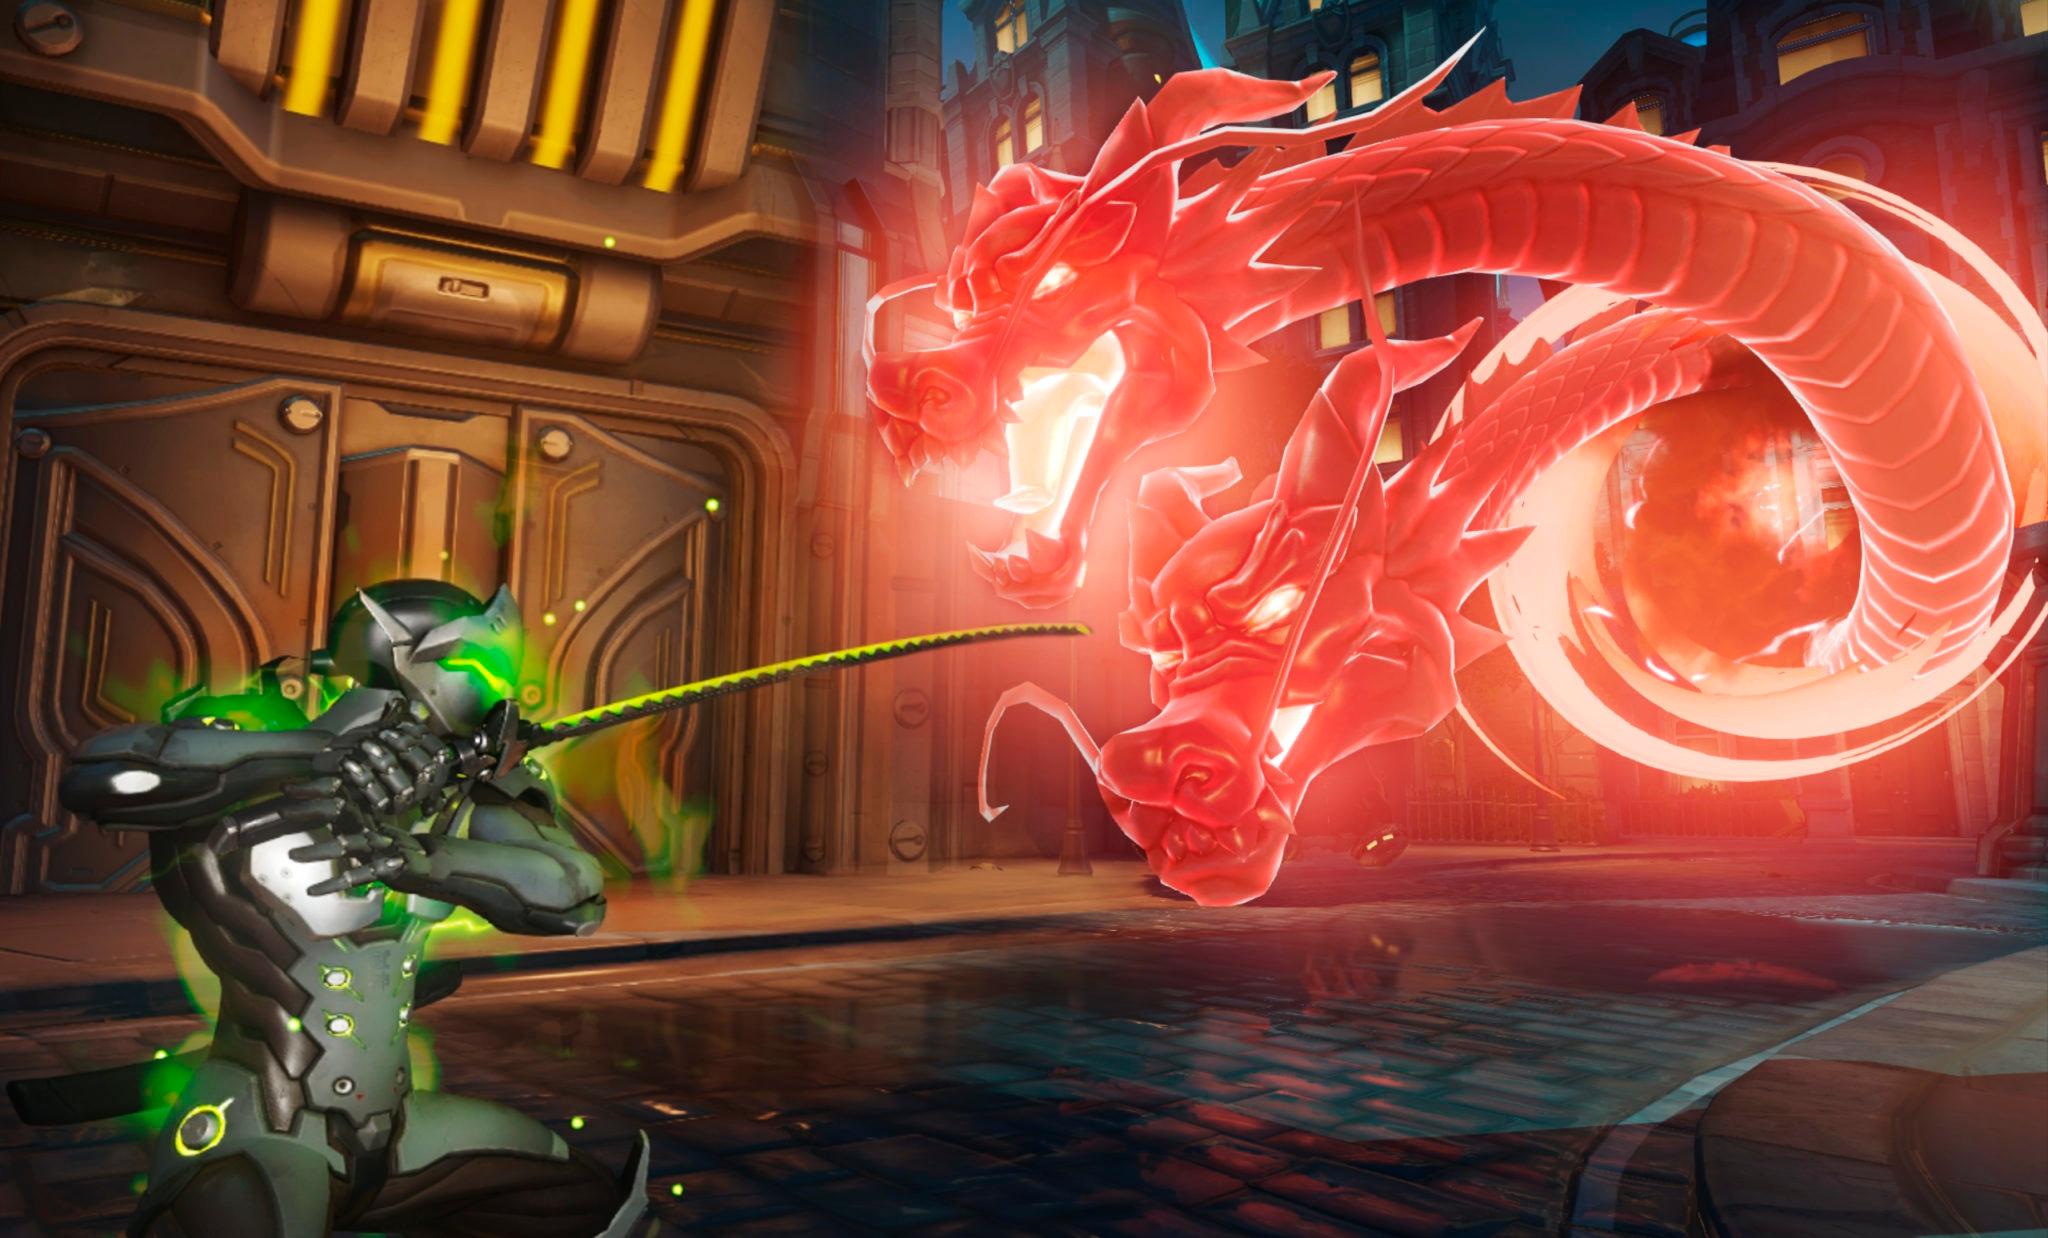 Genji from Overwatch facing off against Hanzo's Dragons